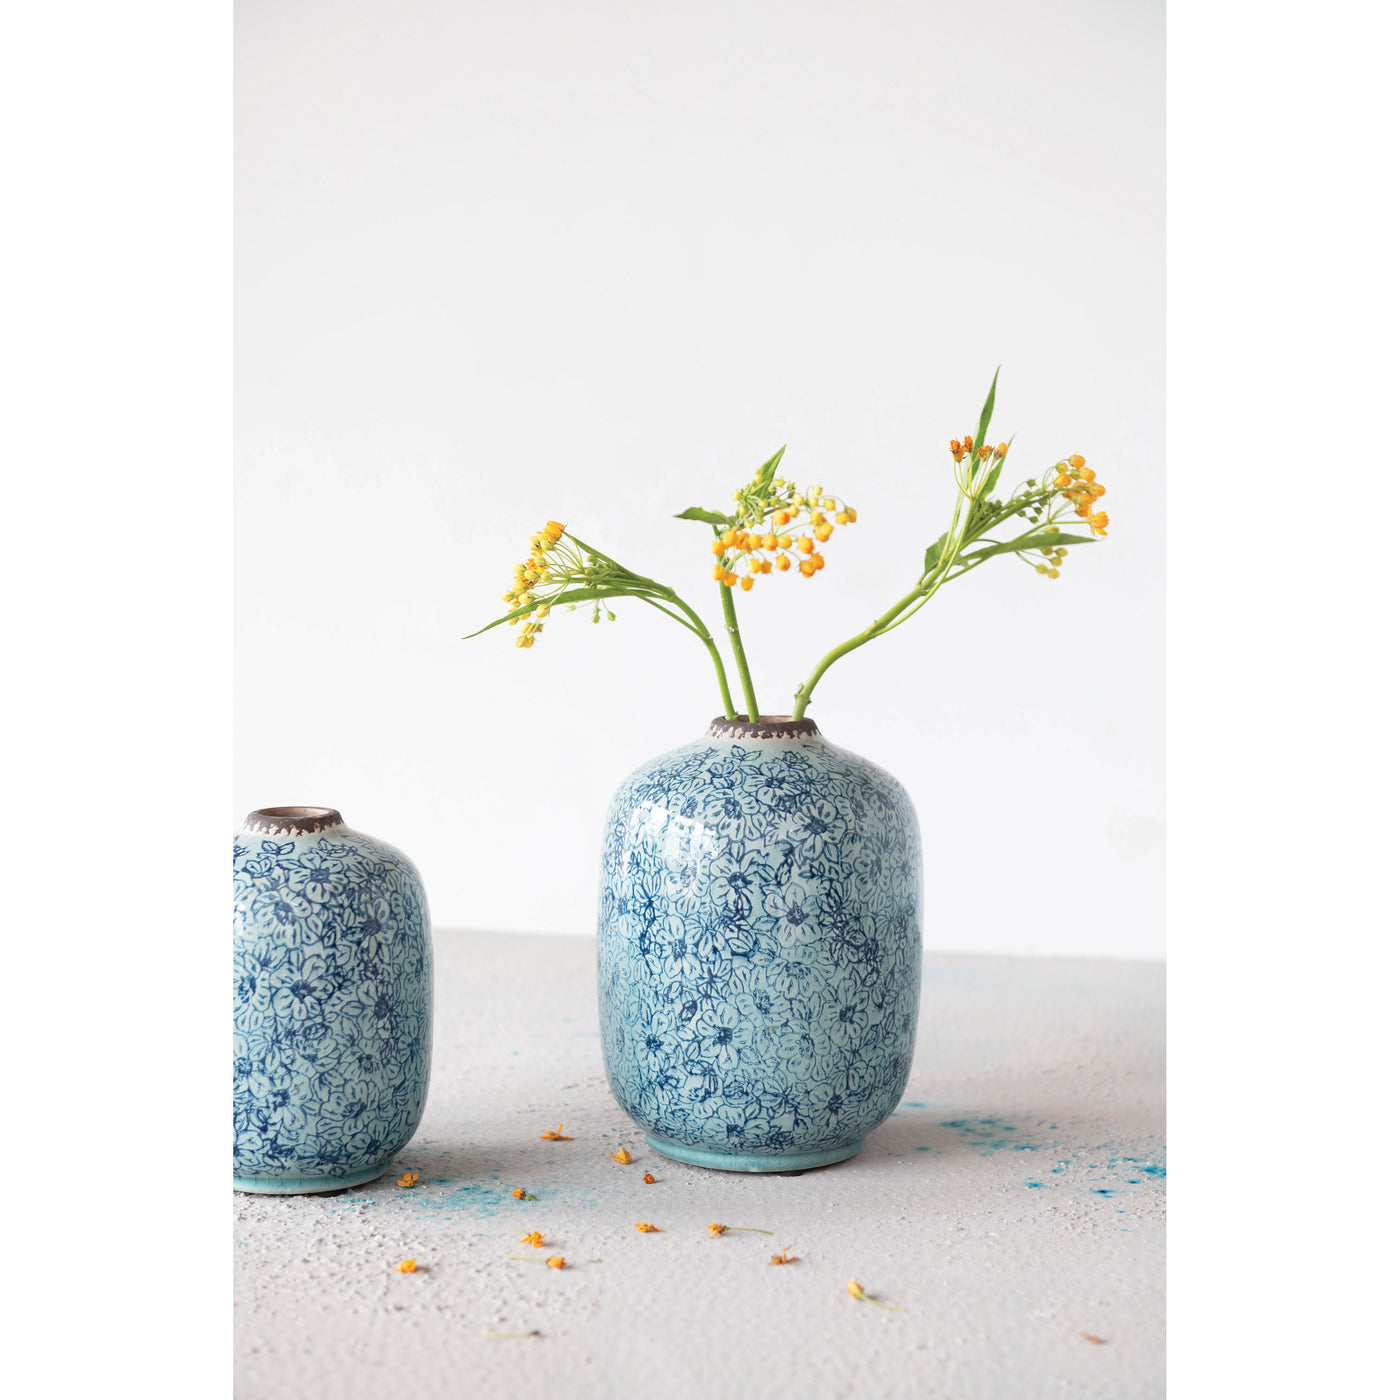 Terracotta Vase with Blue Floral Pattern